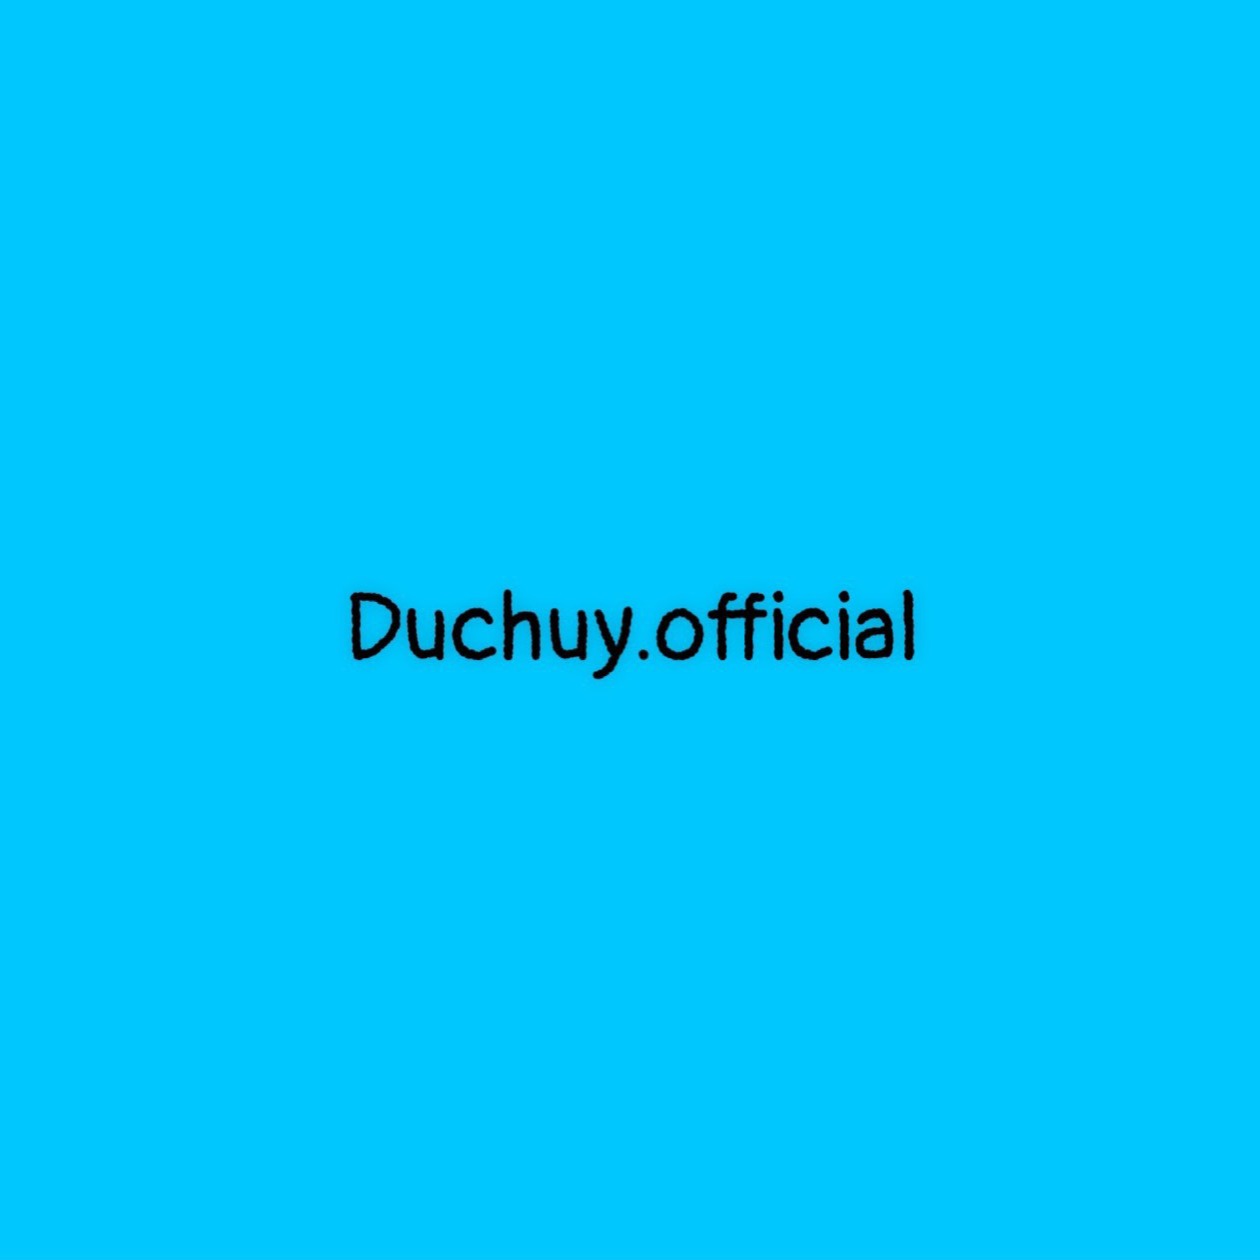 duchuy.official